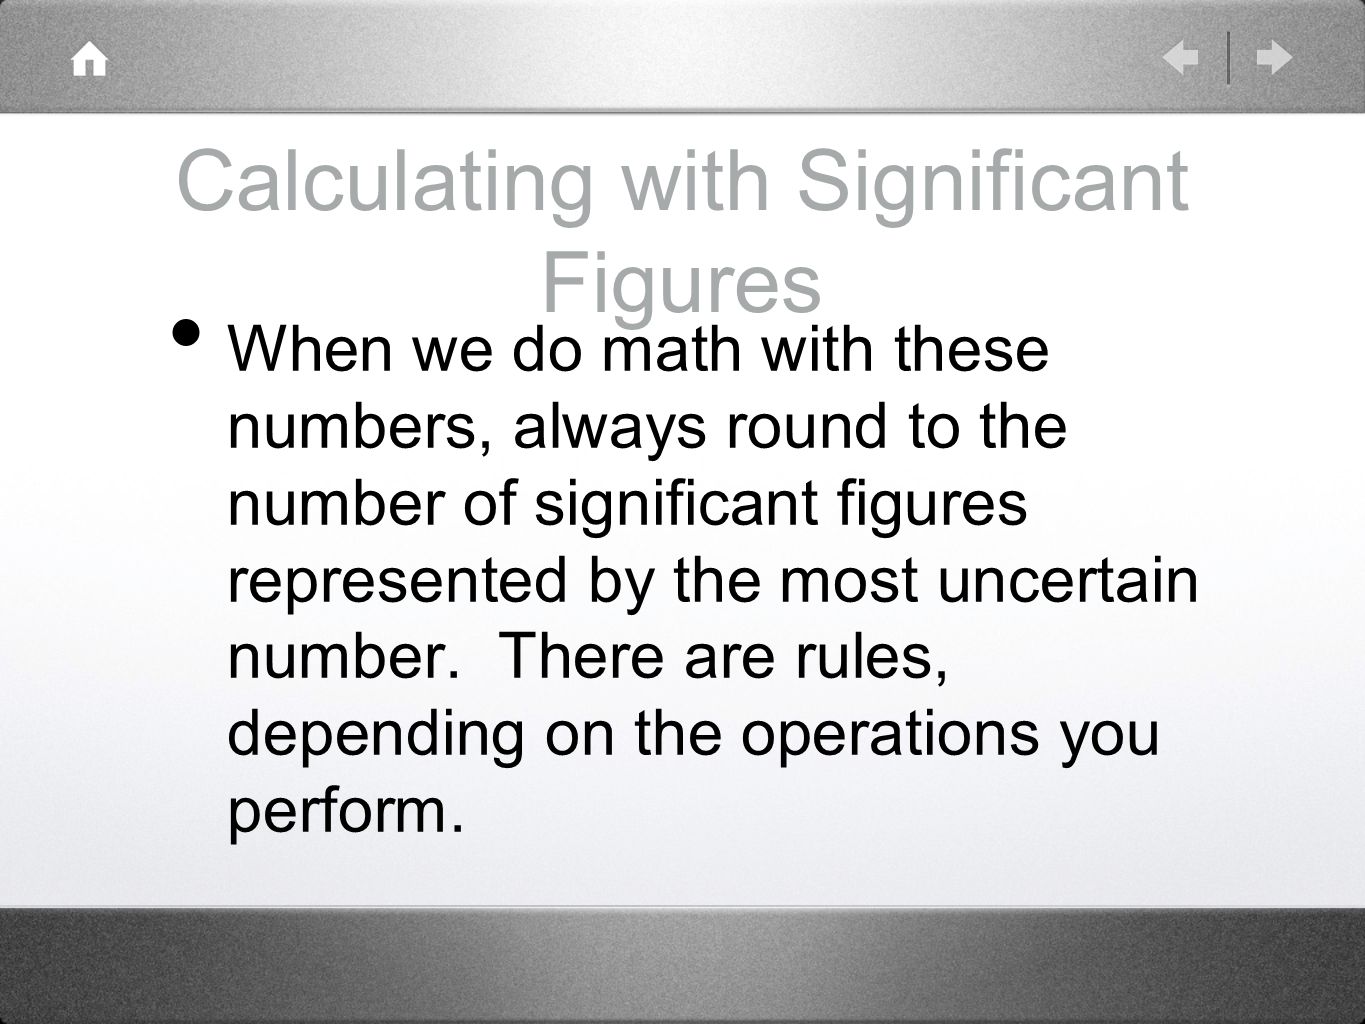 Calculating with Significant Figures When we do math with these numbers, always round to the number of significant figures represented by the most uncertain number.